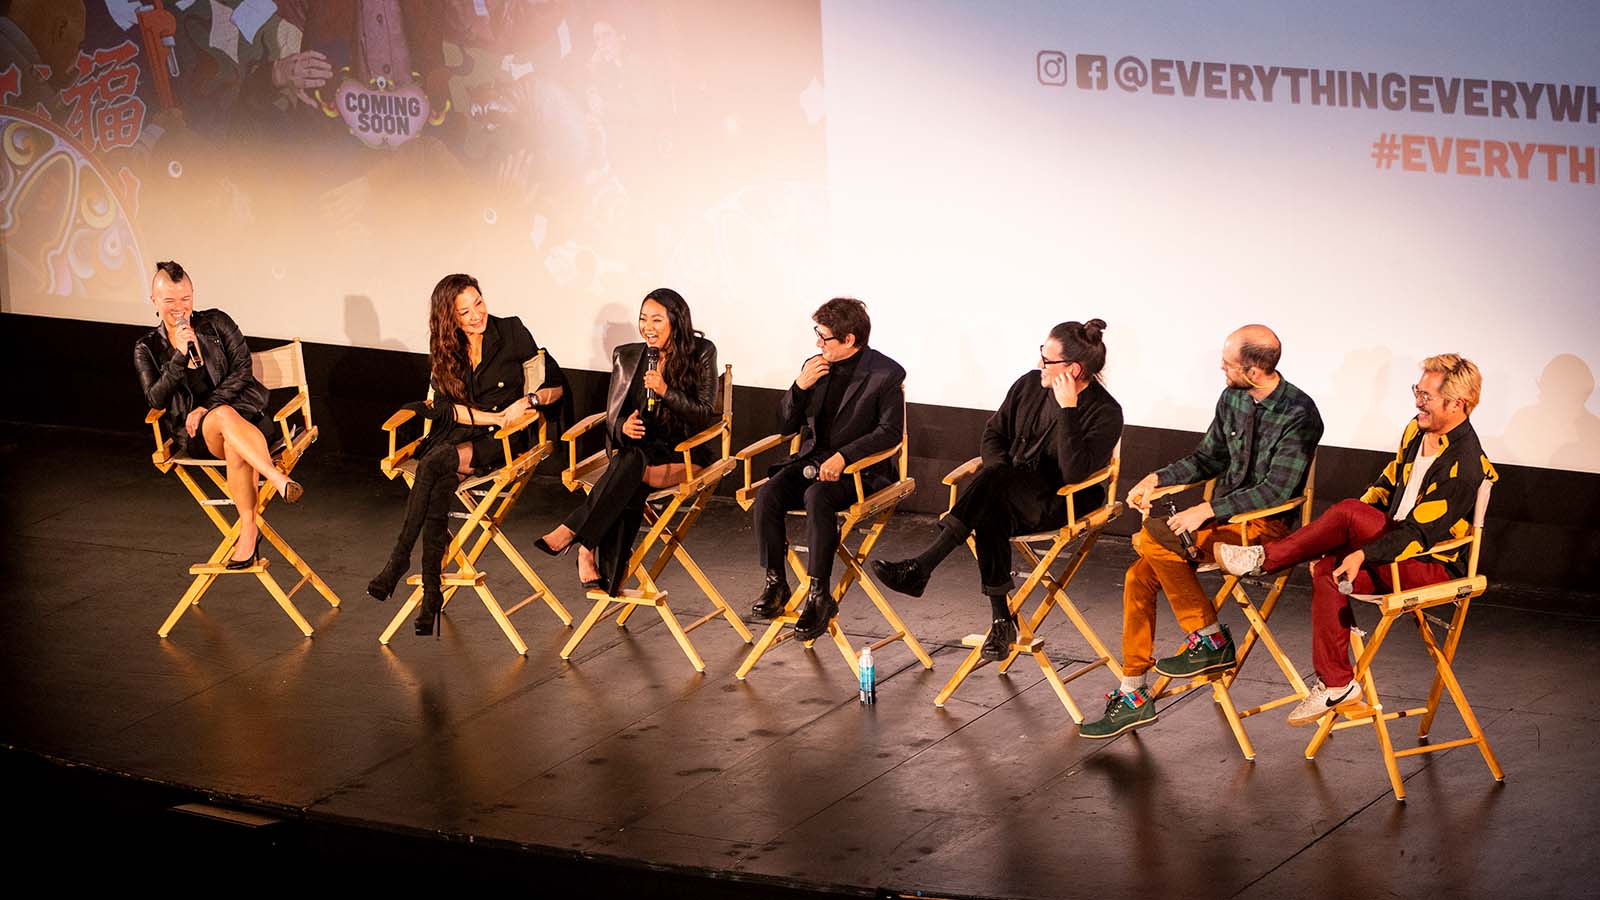 Everything Everywhere All at Once panel at Castro Theatre with Michelle Yeoh, Stephanie Hsu, Ke Huy Quan (cast), Producer Jonathan Wang, and Directors Daniel Scheinert and Dan Kwan